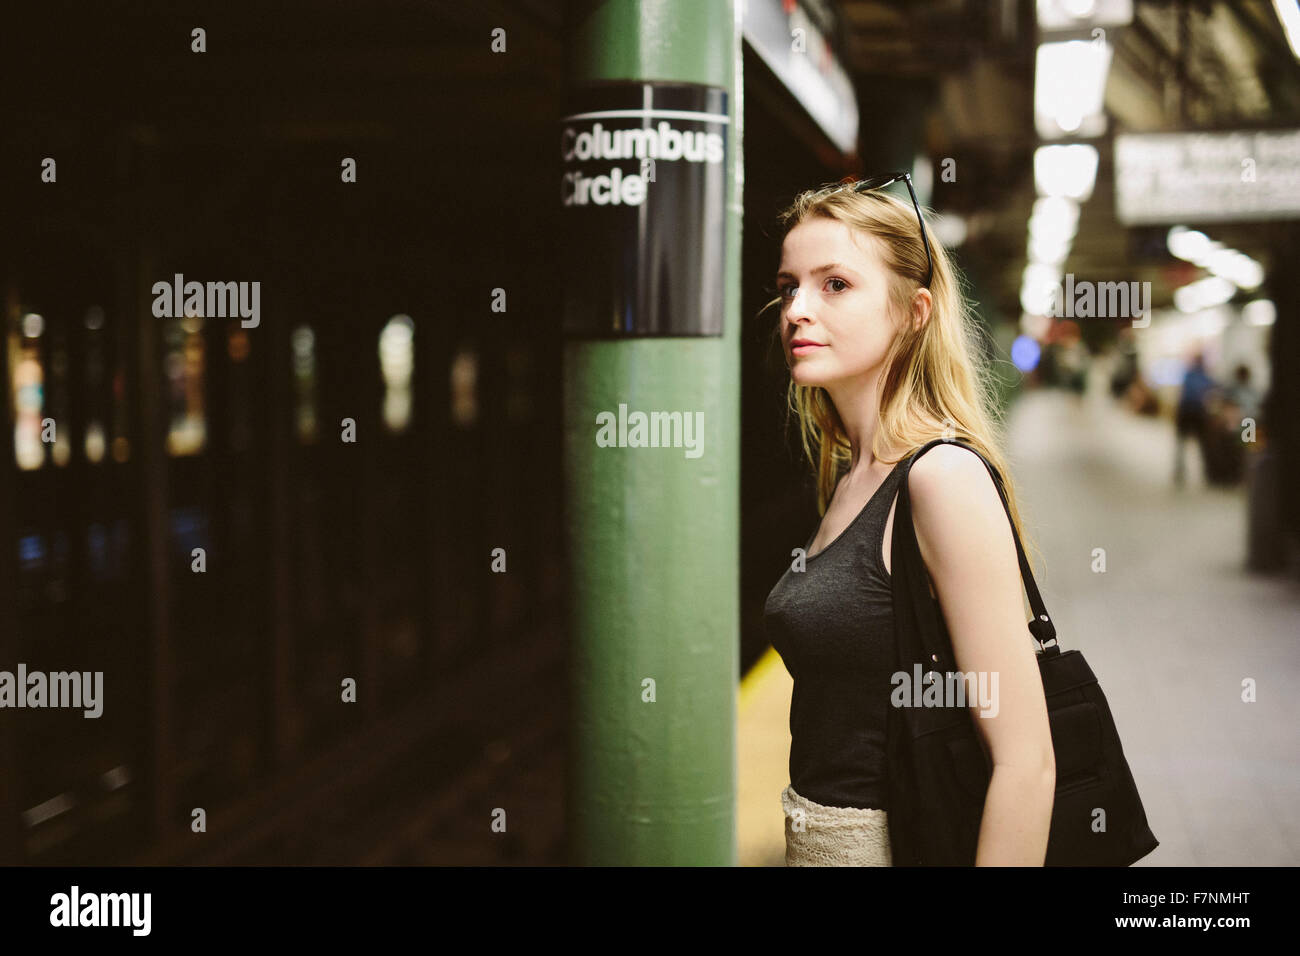 USA, New York City, young woman in the subway in Manhattan Stock Photo